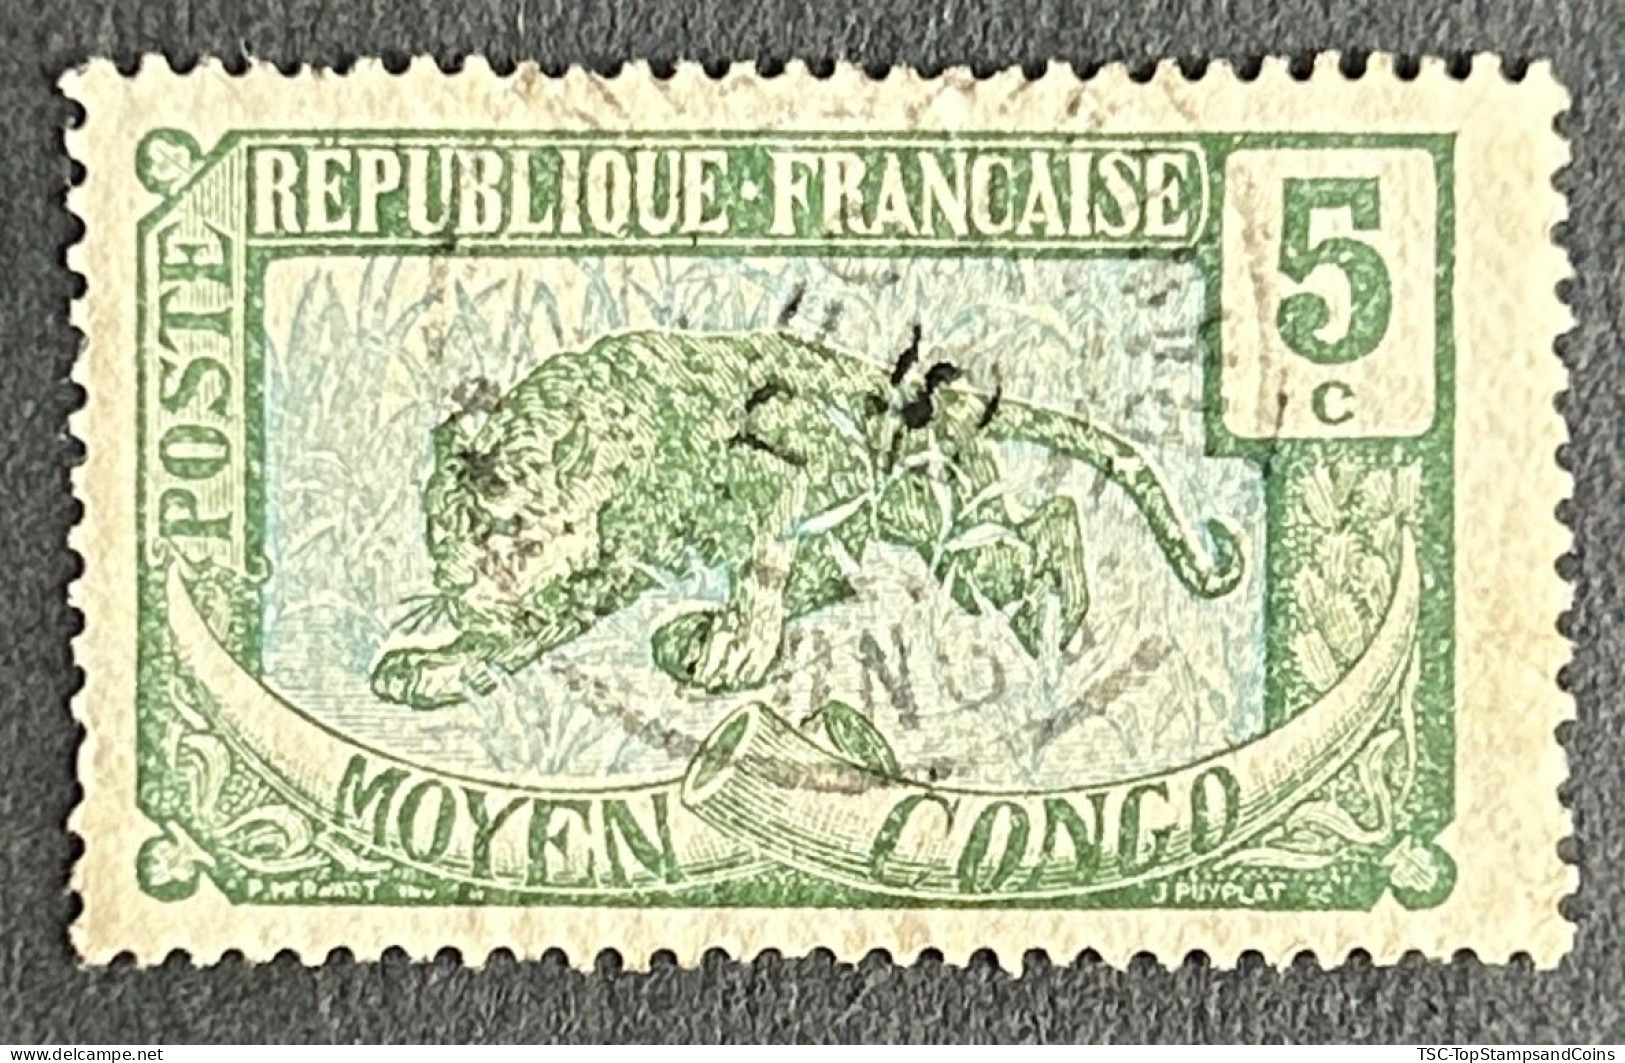 FRCG051UC - Leopard - 5 C Used Stamp - Middle Congo - 1907 - Gebraucht